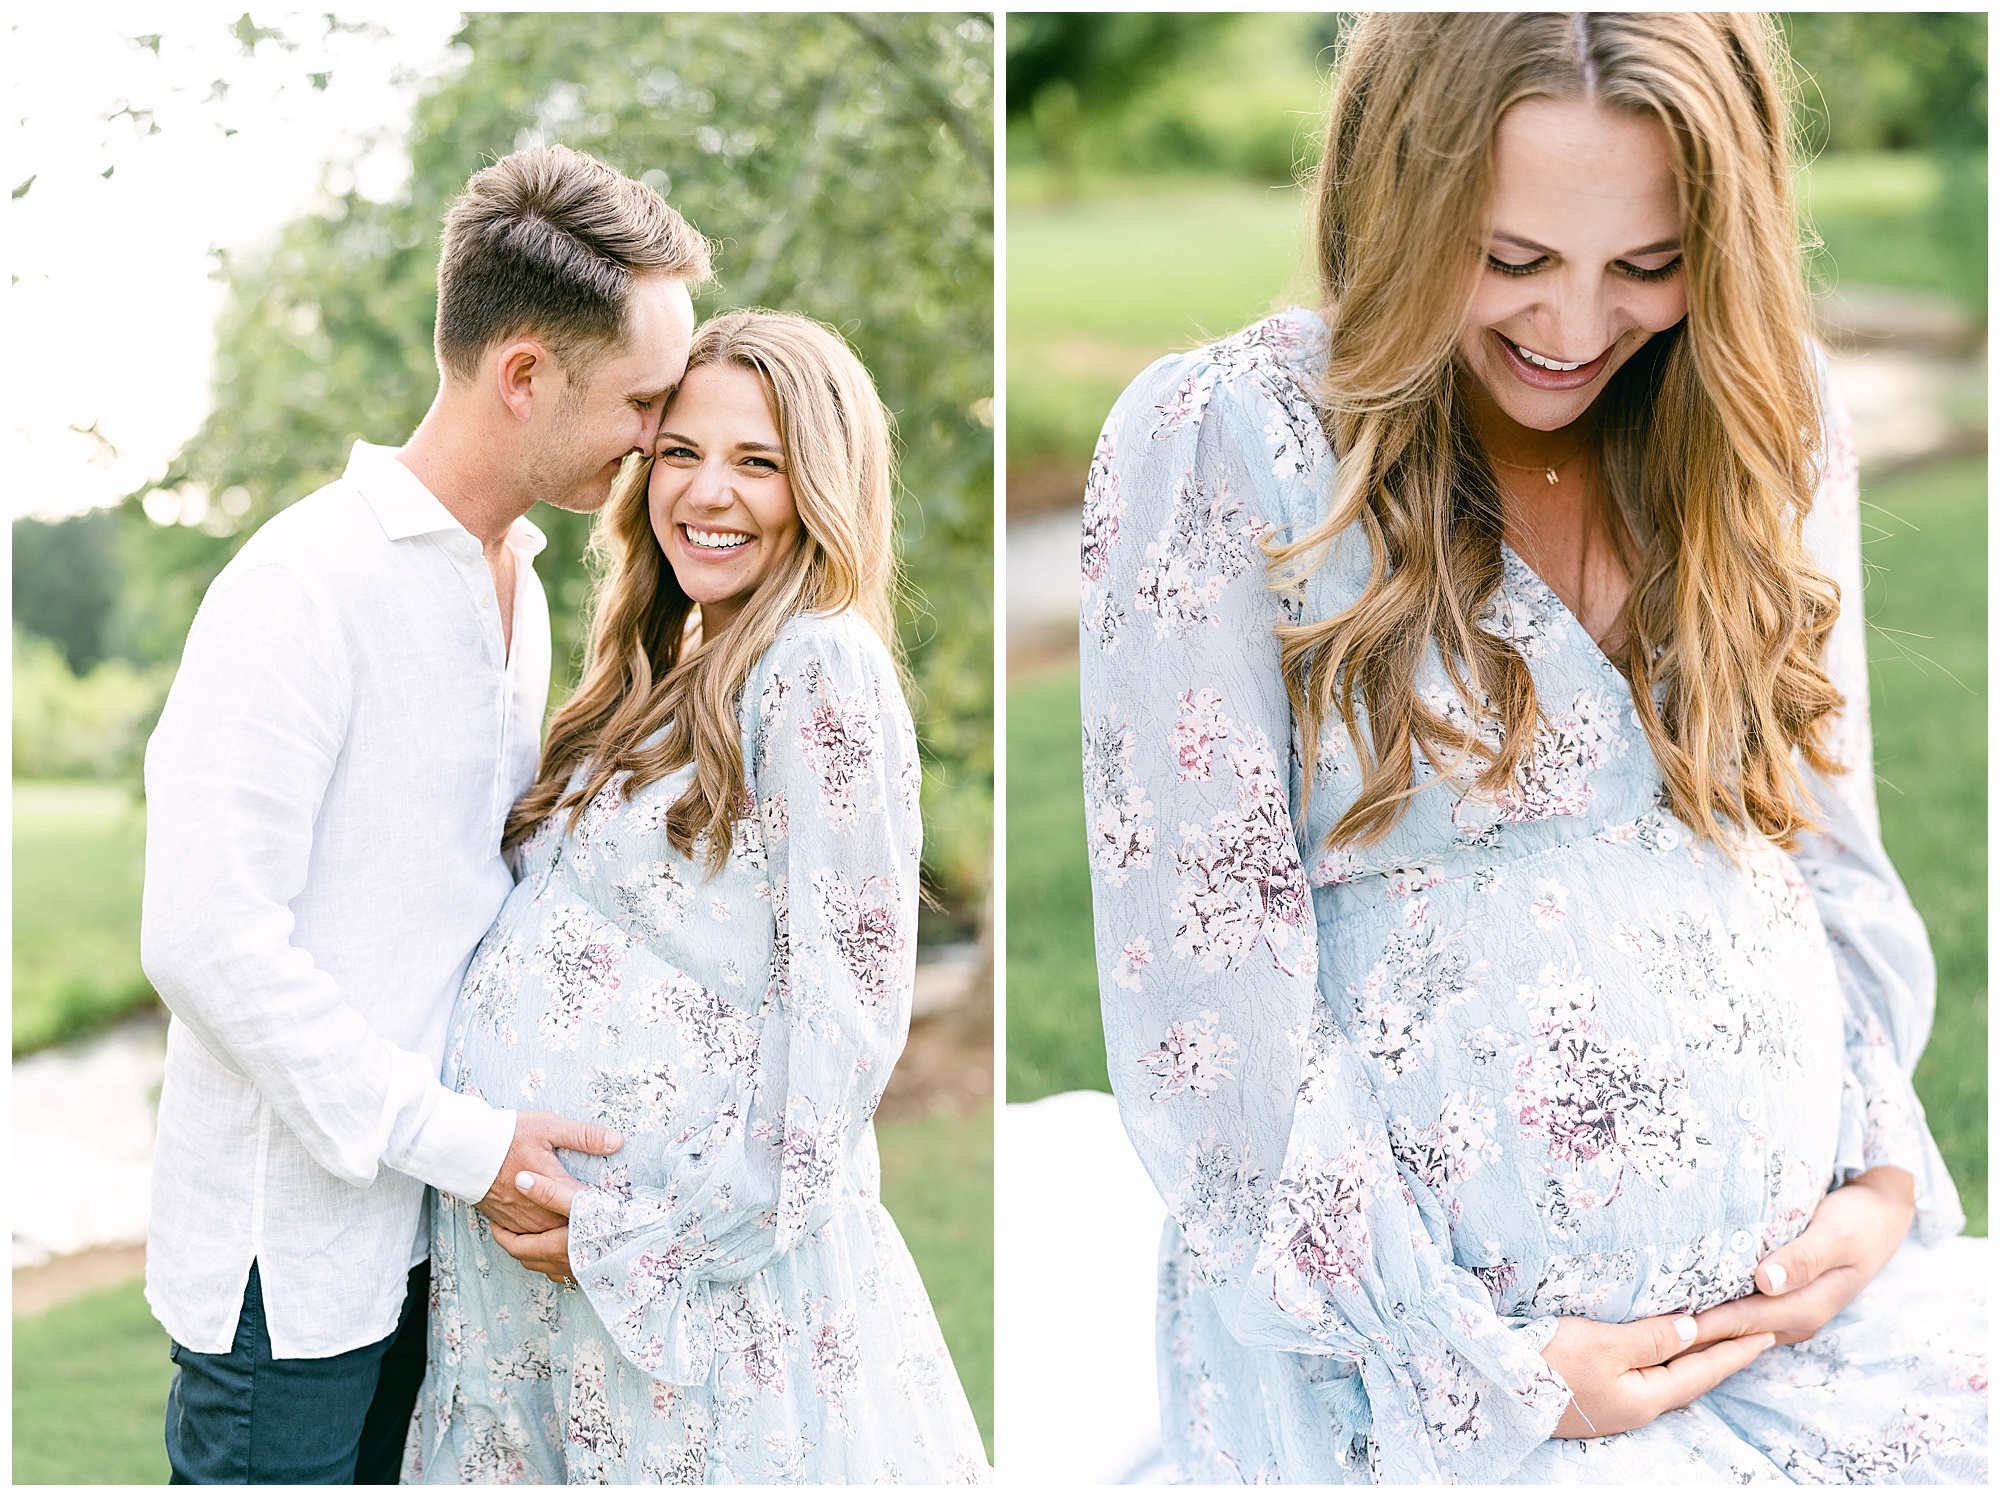 Johns Creek maternity session, outdoor lifestyle session